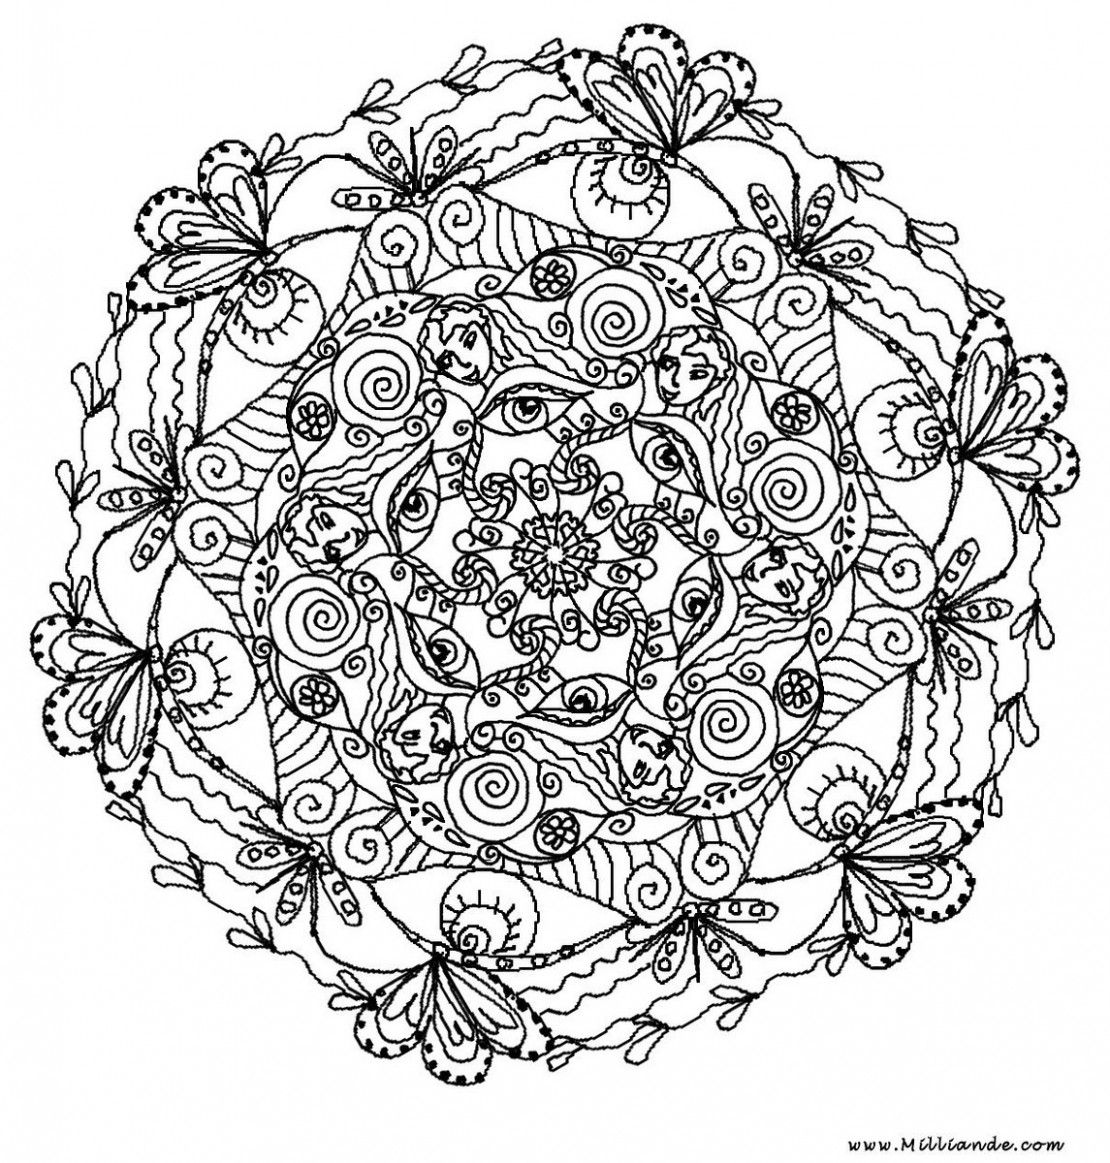 Adult coloring pages flowers to download and print for free